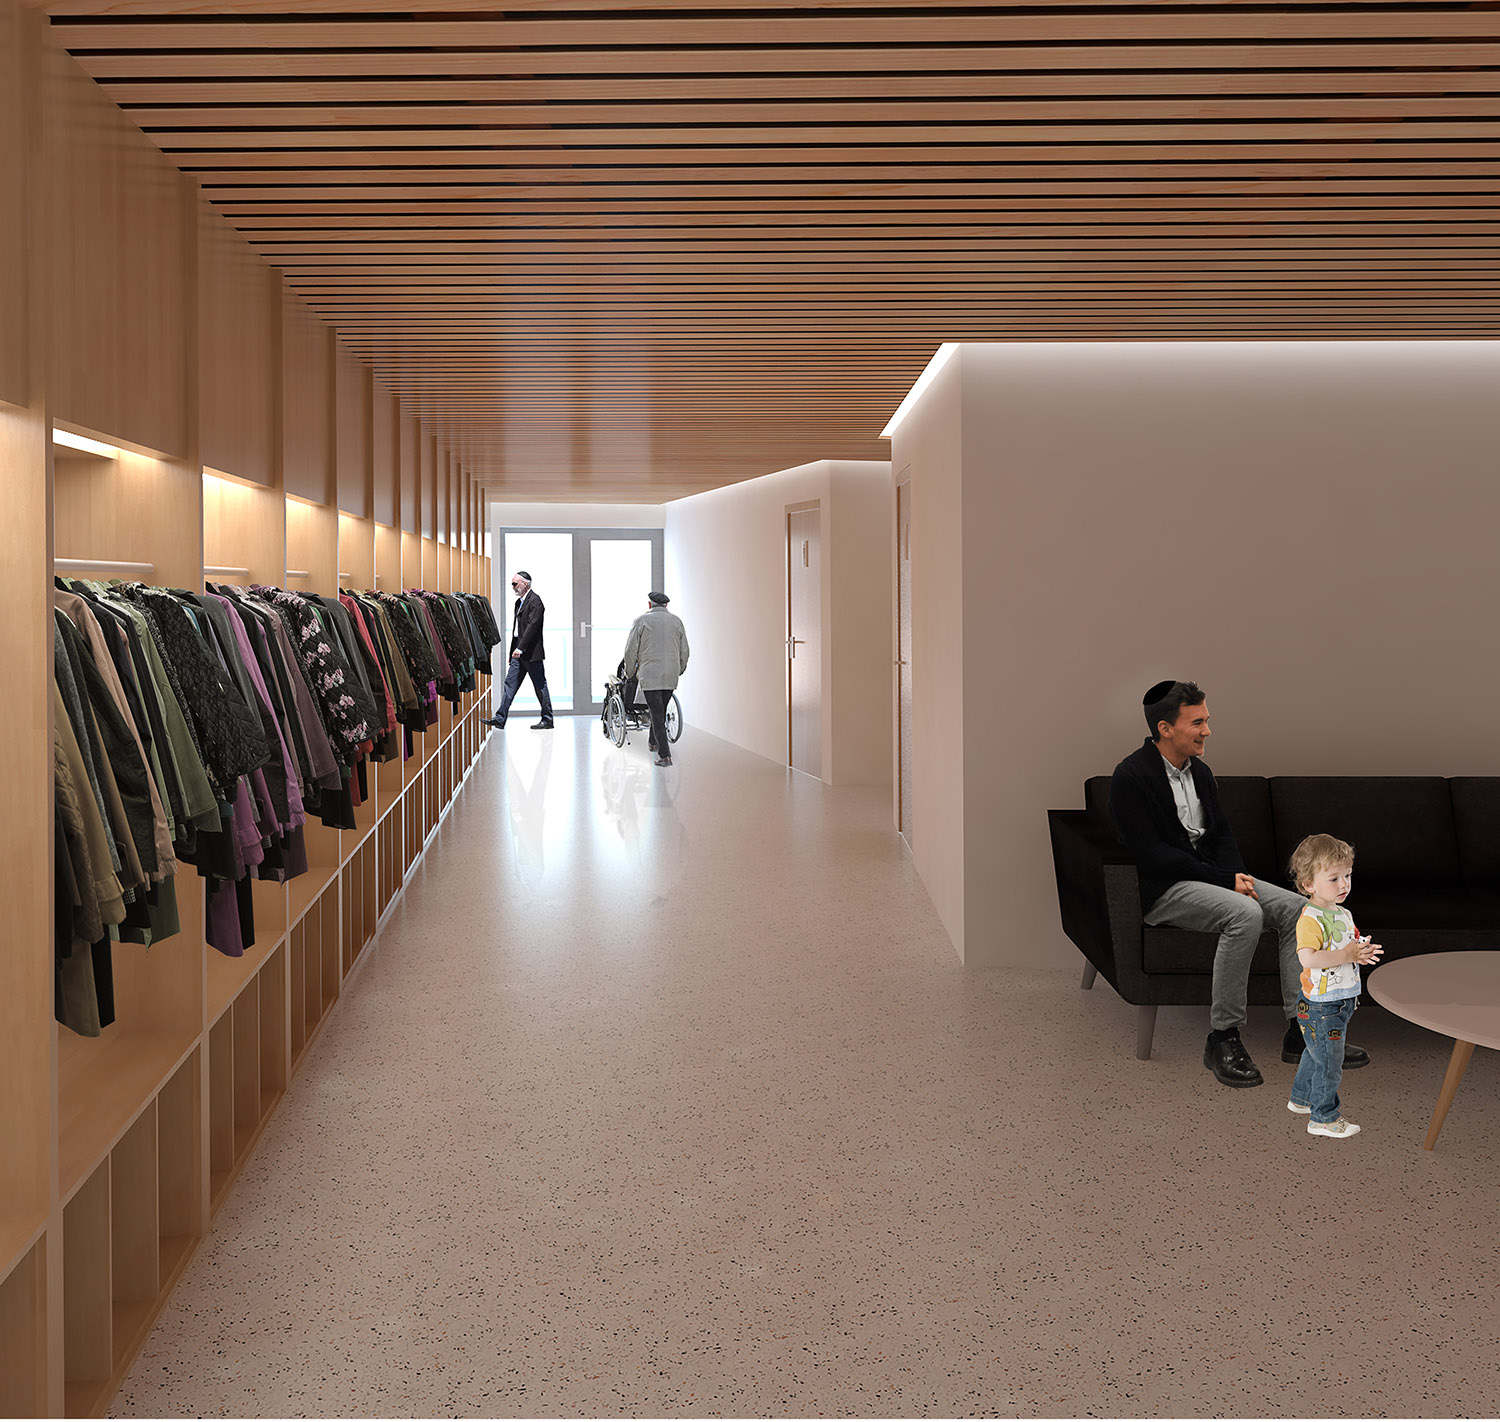 Coatroom at Skokie Valley Synagogue. Rendering by Studio ST Architects